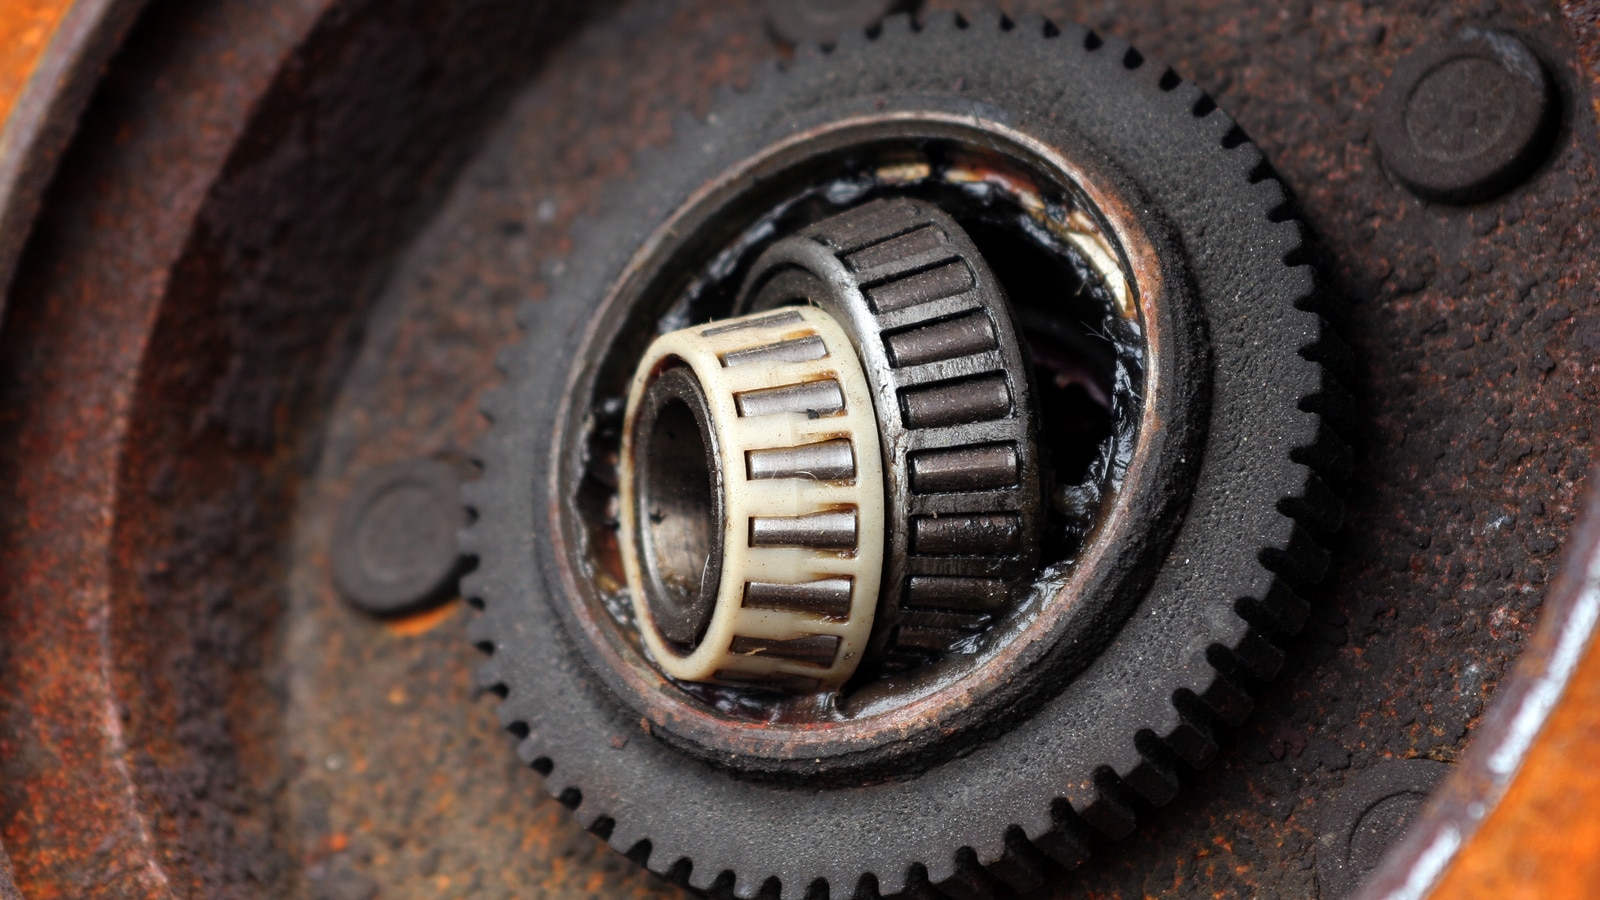 5 Symptoms That Could Indicate A Faulty Wheel Bearing On Your Car